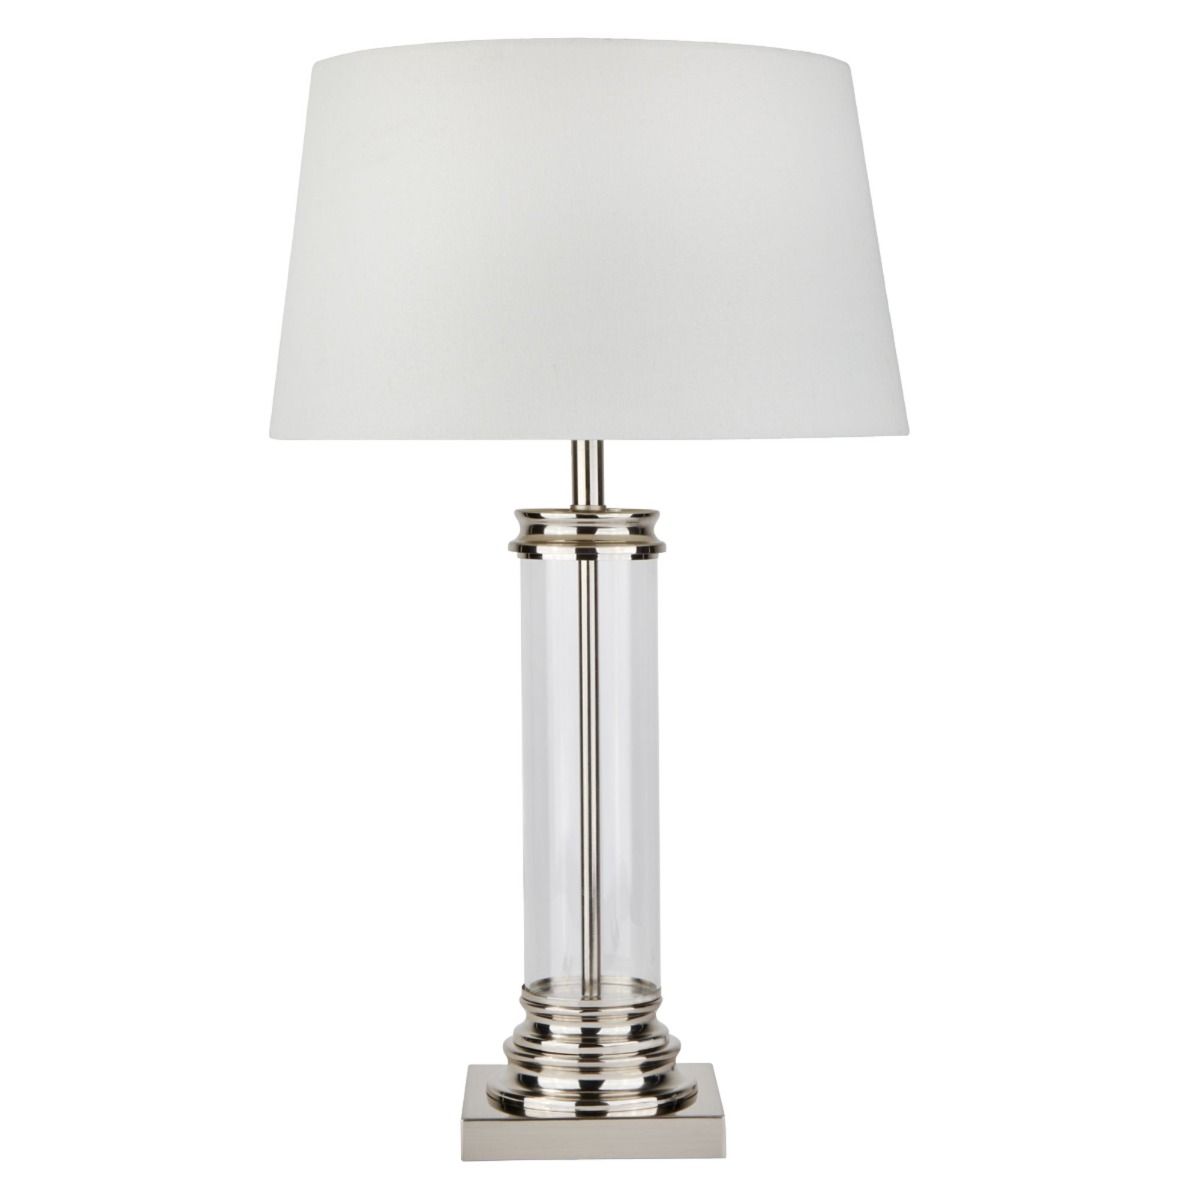 Pedestal Polished Chrome 62cm Table Lamp with Glass Column and Cream Shade